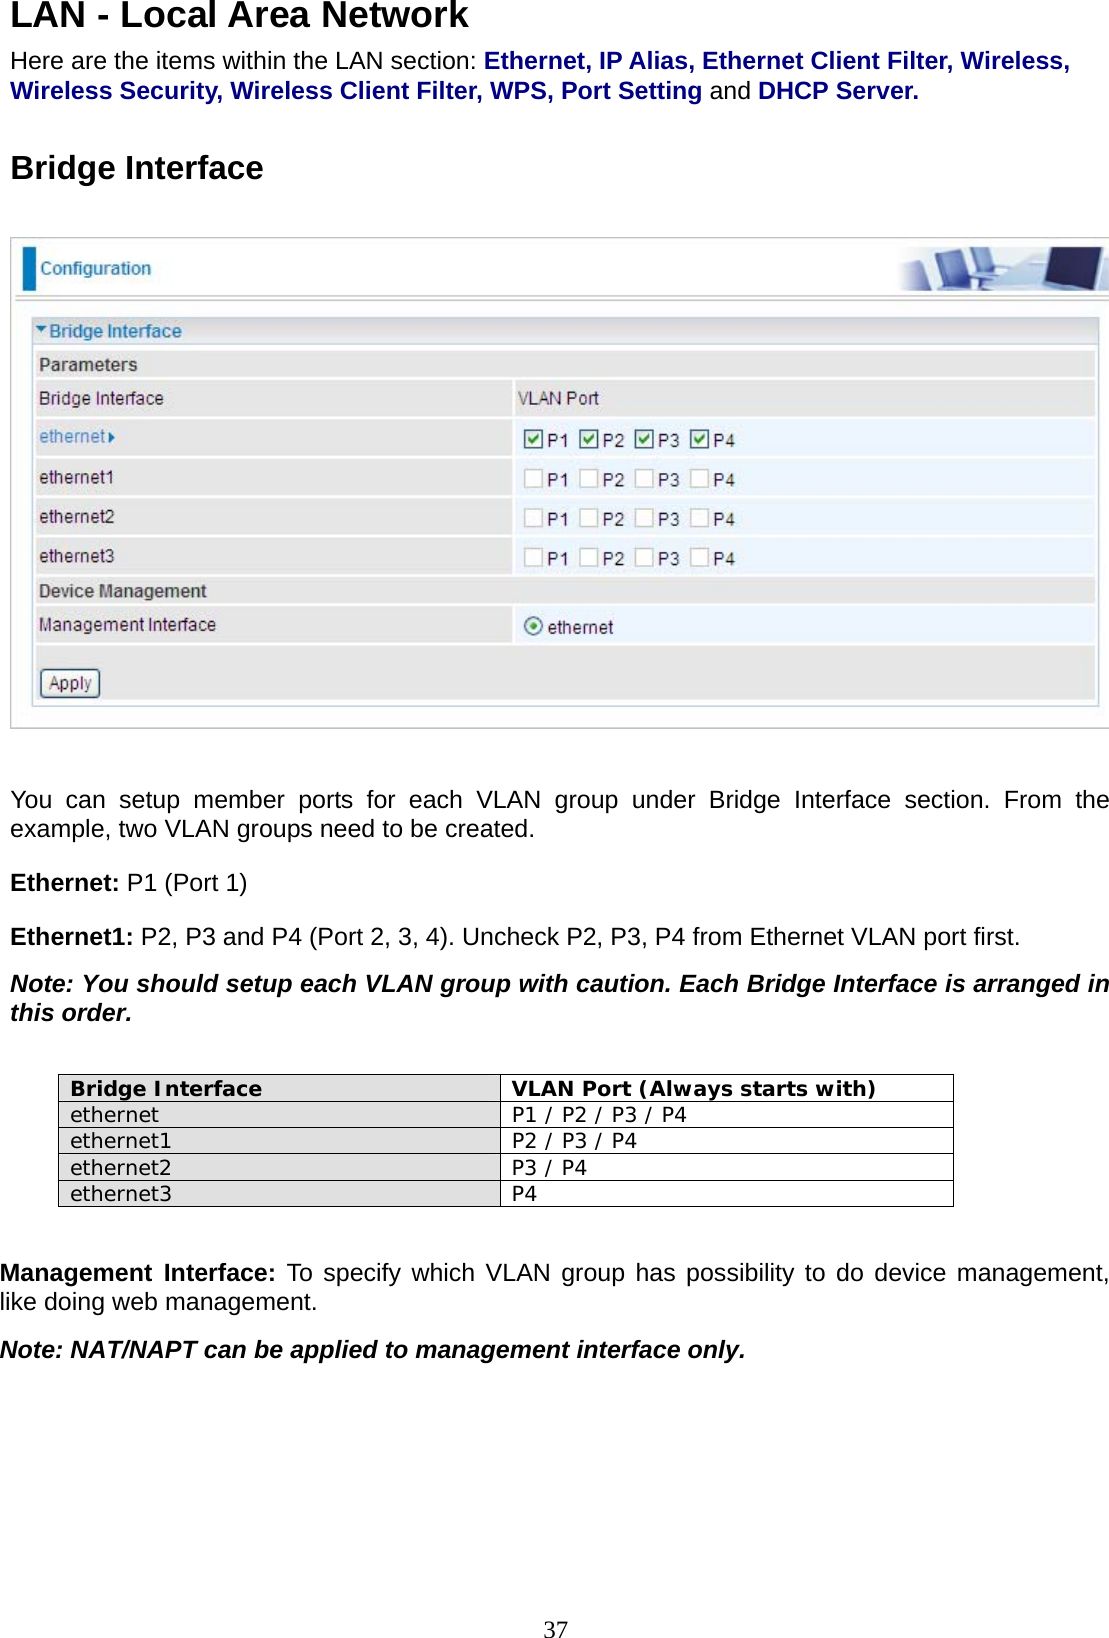 37 LAN - Local Area Network  Here are the items within the LAN section: Ethernet, IP Alias, Ethernet Client Filter, Wireless, Wireless Security, Wireless Client Filter, WPS, Port Setting and DHCP Server.   Bridge Interface    You can setup member ports for each VLAN group under Bridge Interface section. From the example, two VLAN groups need to be created. Ethernet: P1 (Port 1) Ethernet1: P2, P3 and P4 (Port 2, 3, 4). Uncheck P2, P3, P4 from Ethernet VLAN port first. Note: You should setup each VLAN group with caution. Each Bridge Interface is arranged in this order.  Bridge Interface   VLAN Port (Always starts with) ethernet  P1 / P2 / P3 / P4  ethernet1  P2 / P3 / P4 ethernet2  P3 / P4 ethernet3 P4  Management Interface: To specify which VLAN group has possibility to do device management, like doing web management. Note: NAT/NAPT can be applied to management interface only.      